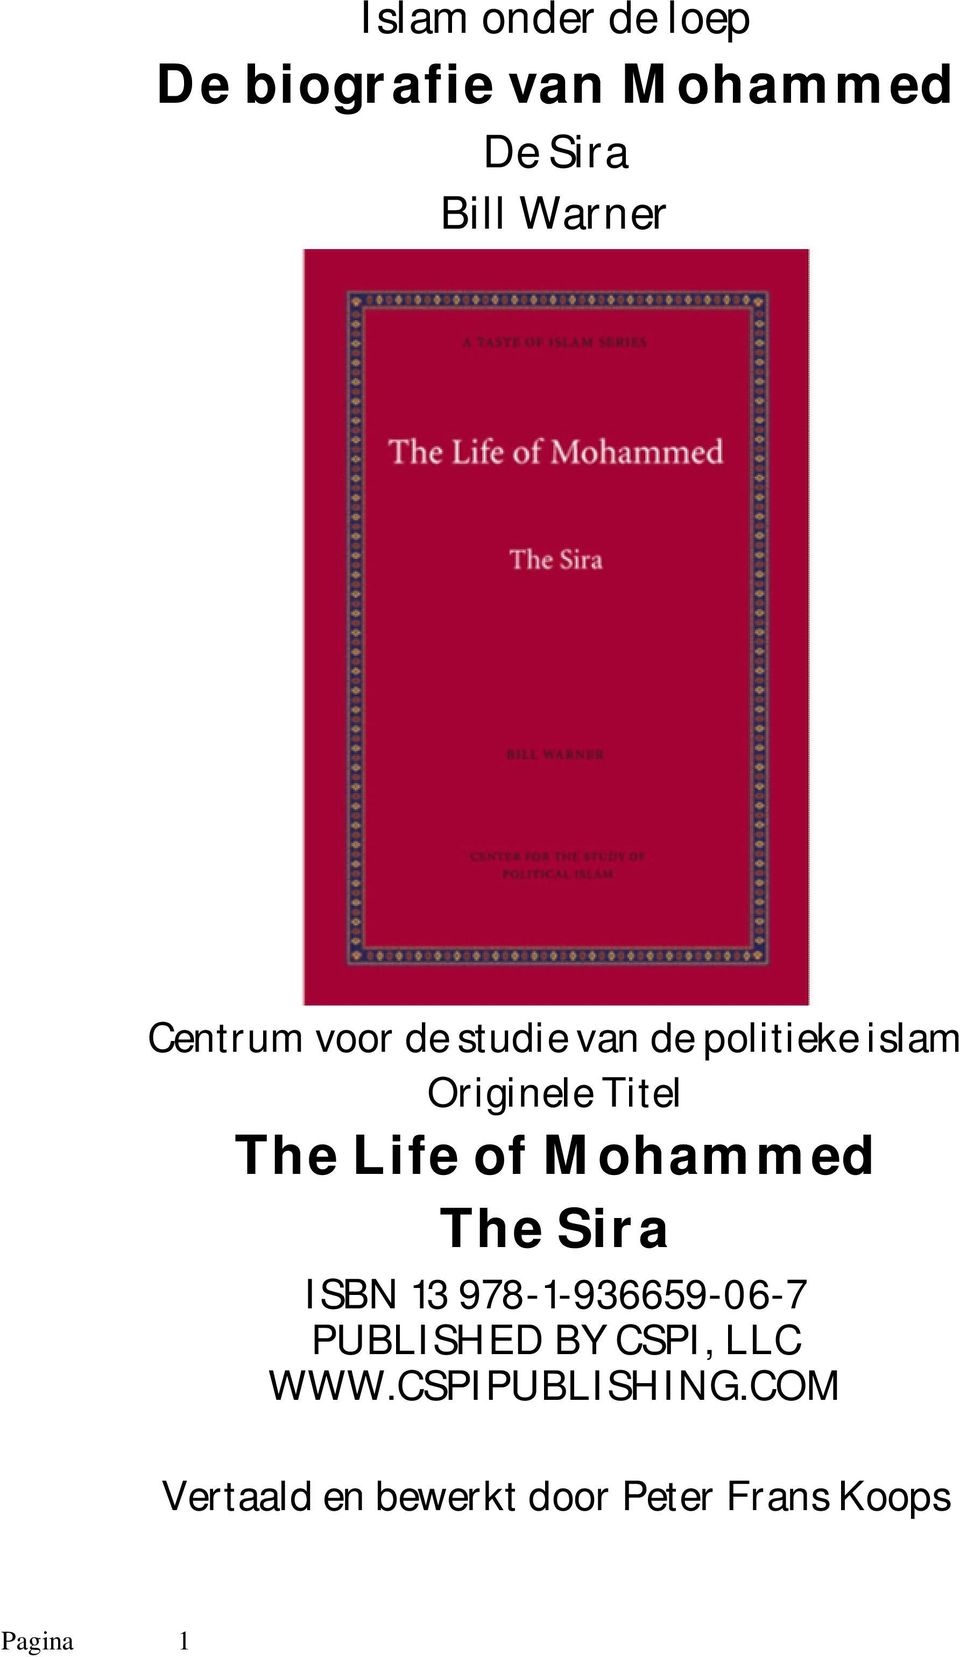 of Mohammed The Sira ISBN 13 978-1-936659-06-7 PUBLISHED BY CSPI, LLC